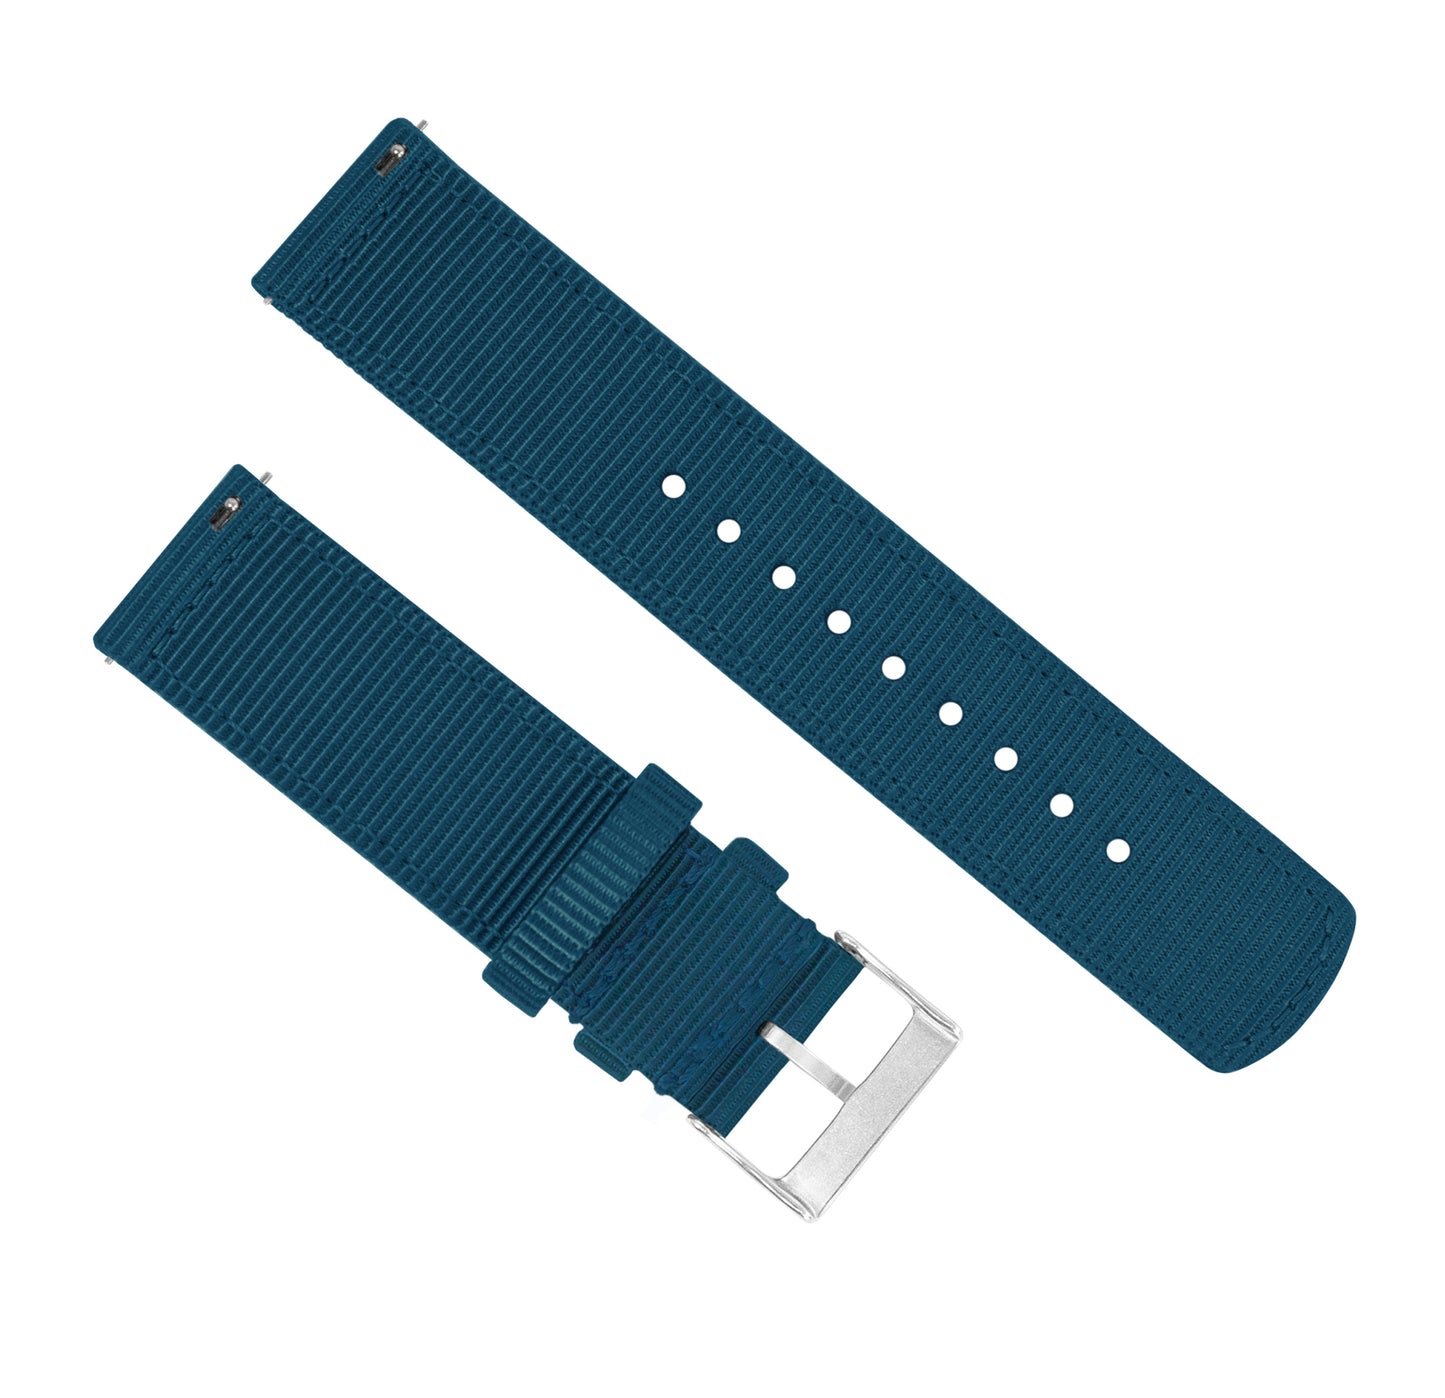 Withings Nokia Activité and Steel HR | Two-Piece NATO Style | Steel Blue - Barton Watch Bands